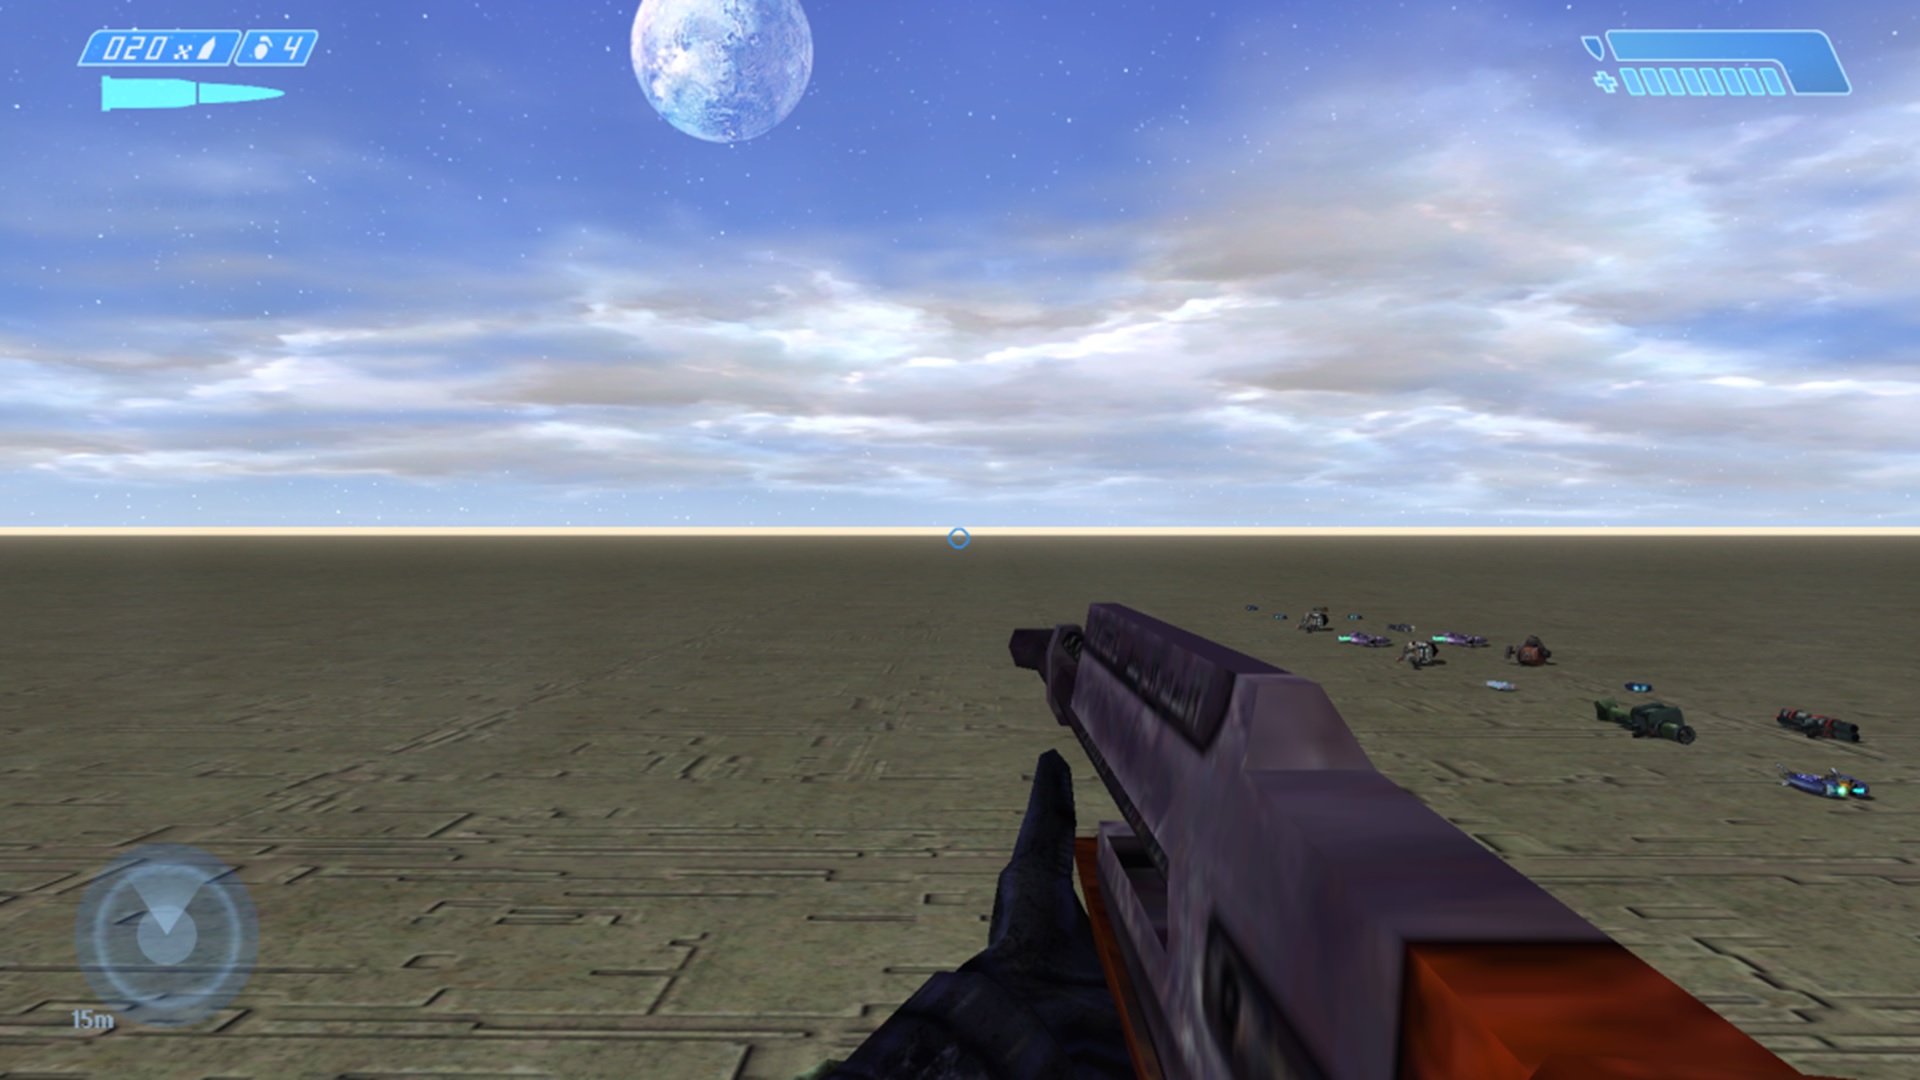 Halo CE first-person shot of the "shovel" sniper rifle